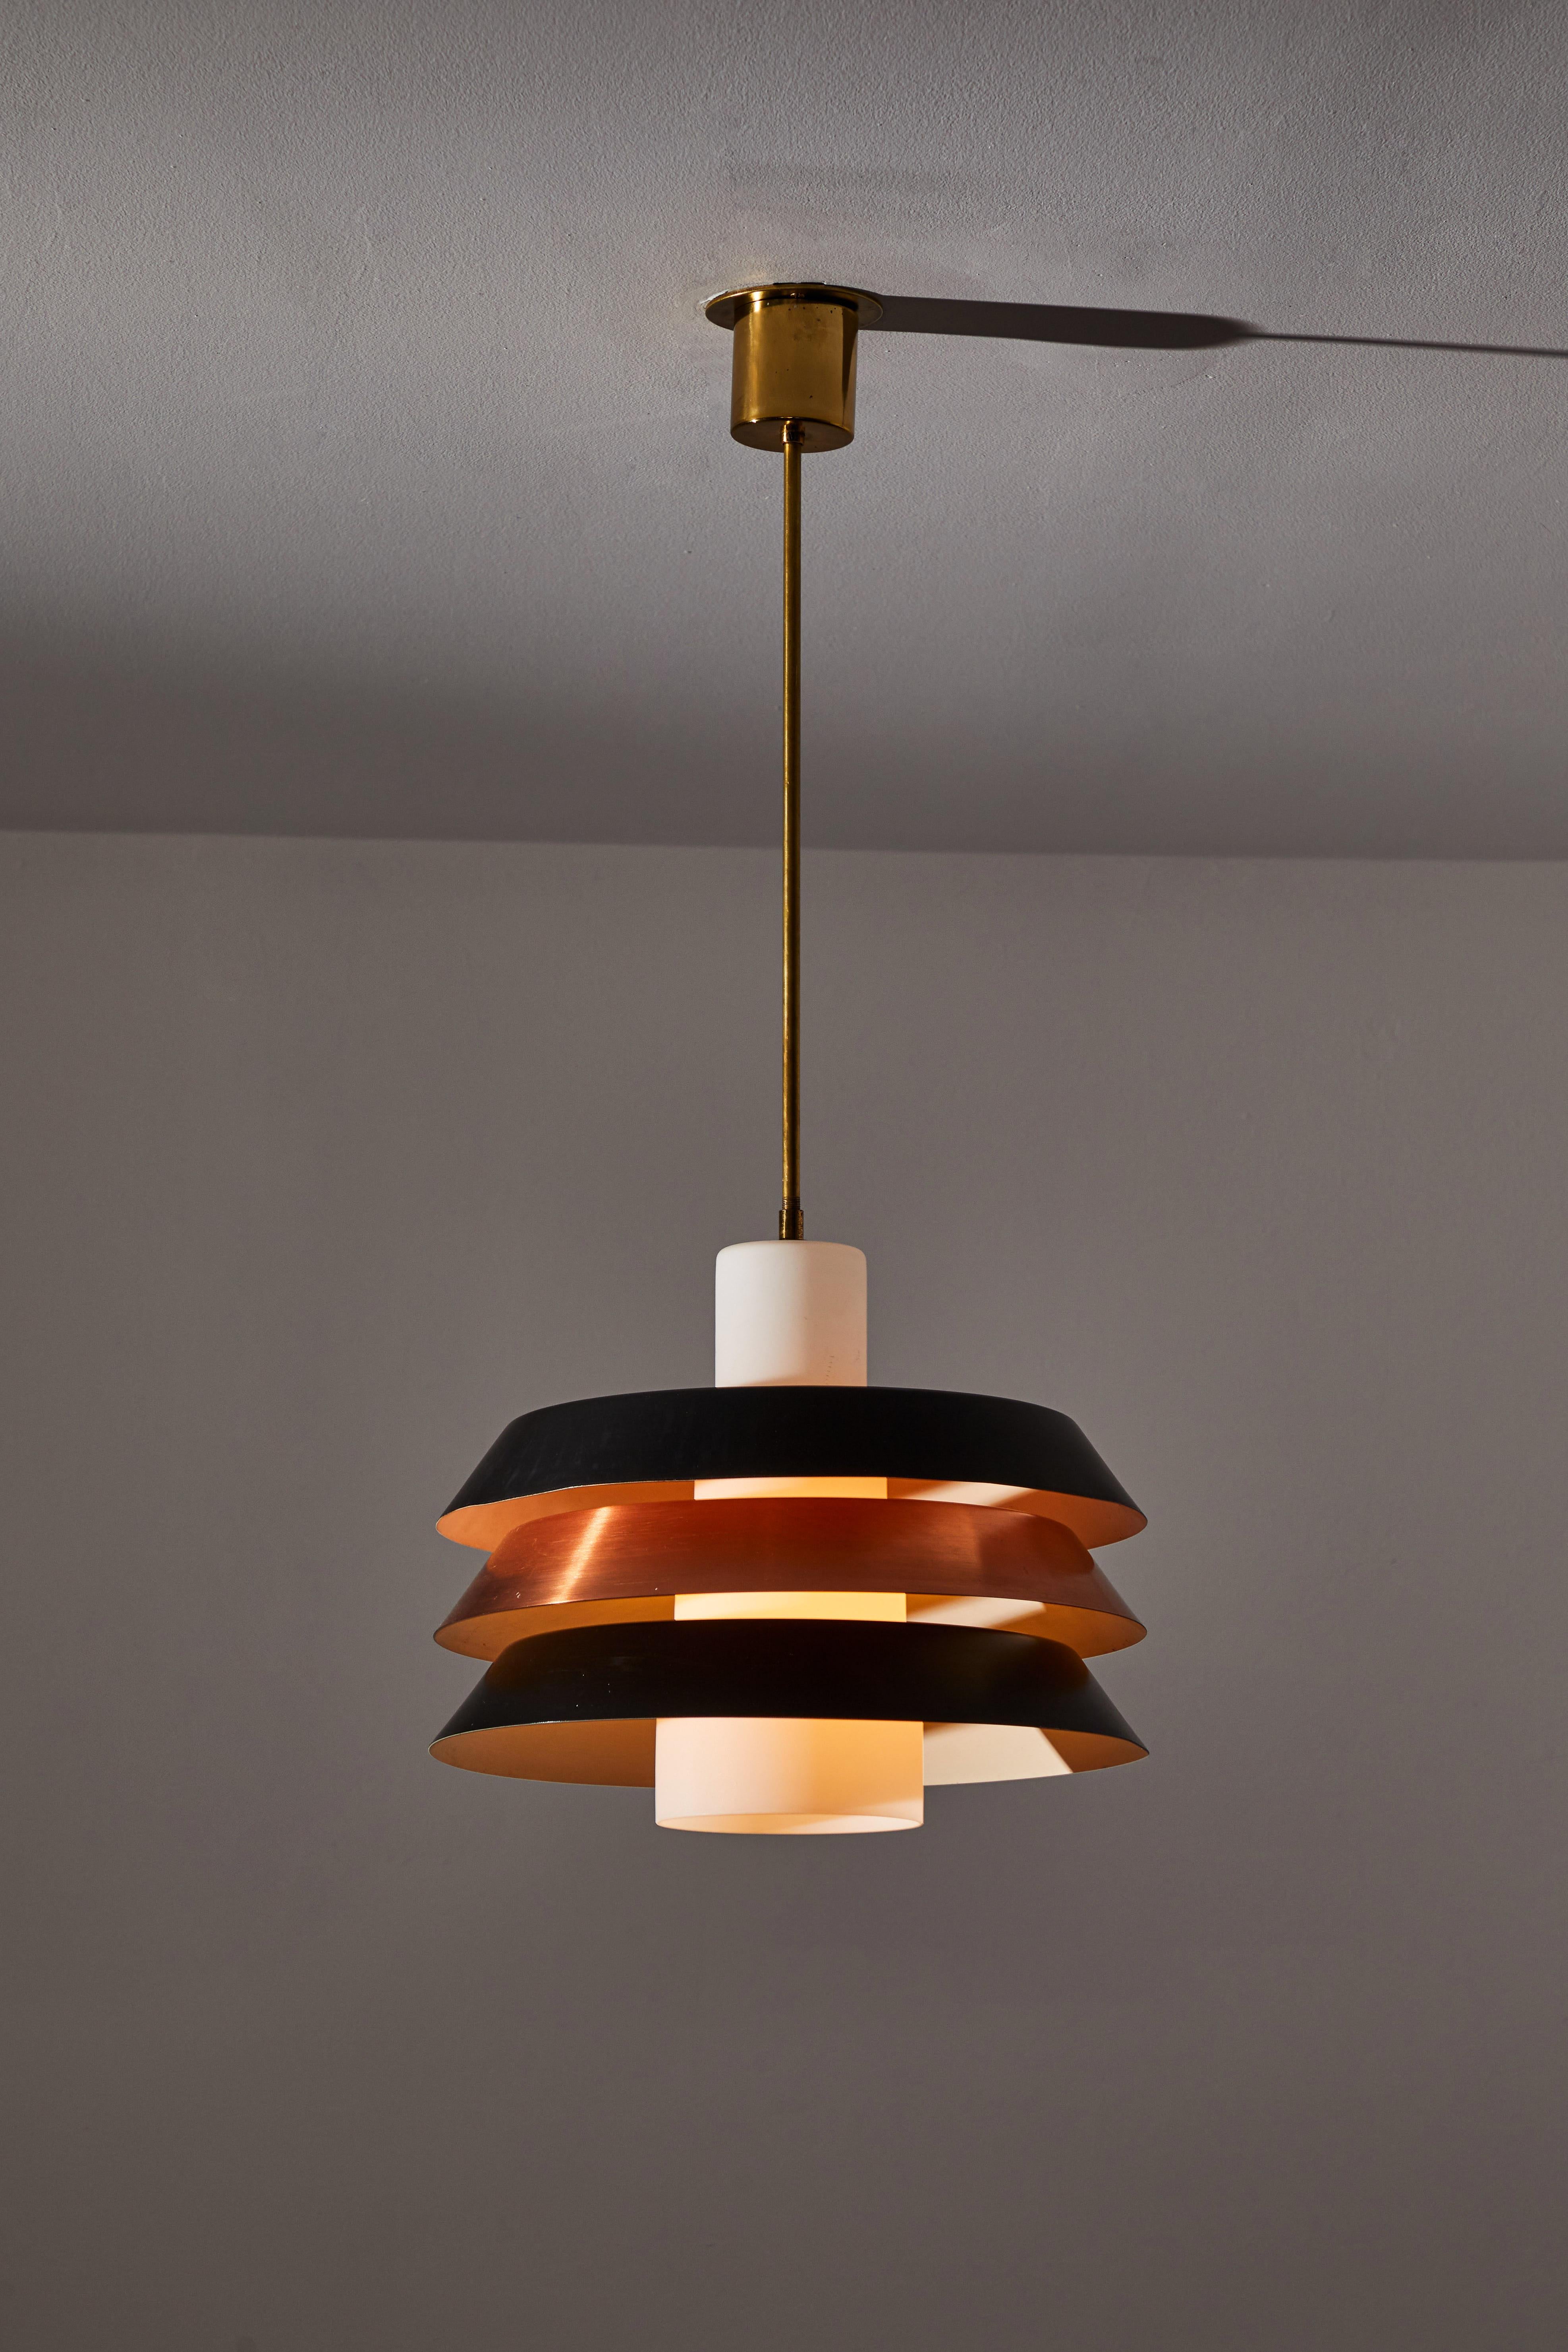 Pendant in the style of Stilnovo. Manufactured in Italy, circa the 1960s. Lacquered metal, copper, and glass. Rewired for U.S. standards. Original canopy, custom brass ceiling plate. We recommend one E27 100w maximum bulb. Bulb is provided as a